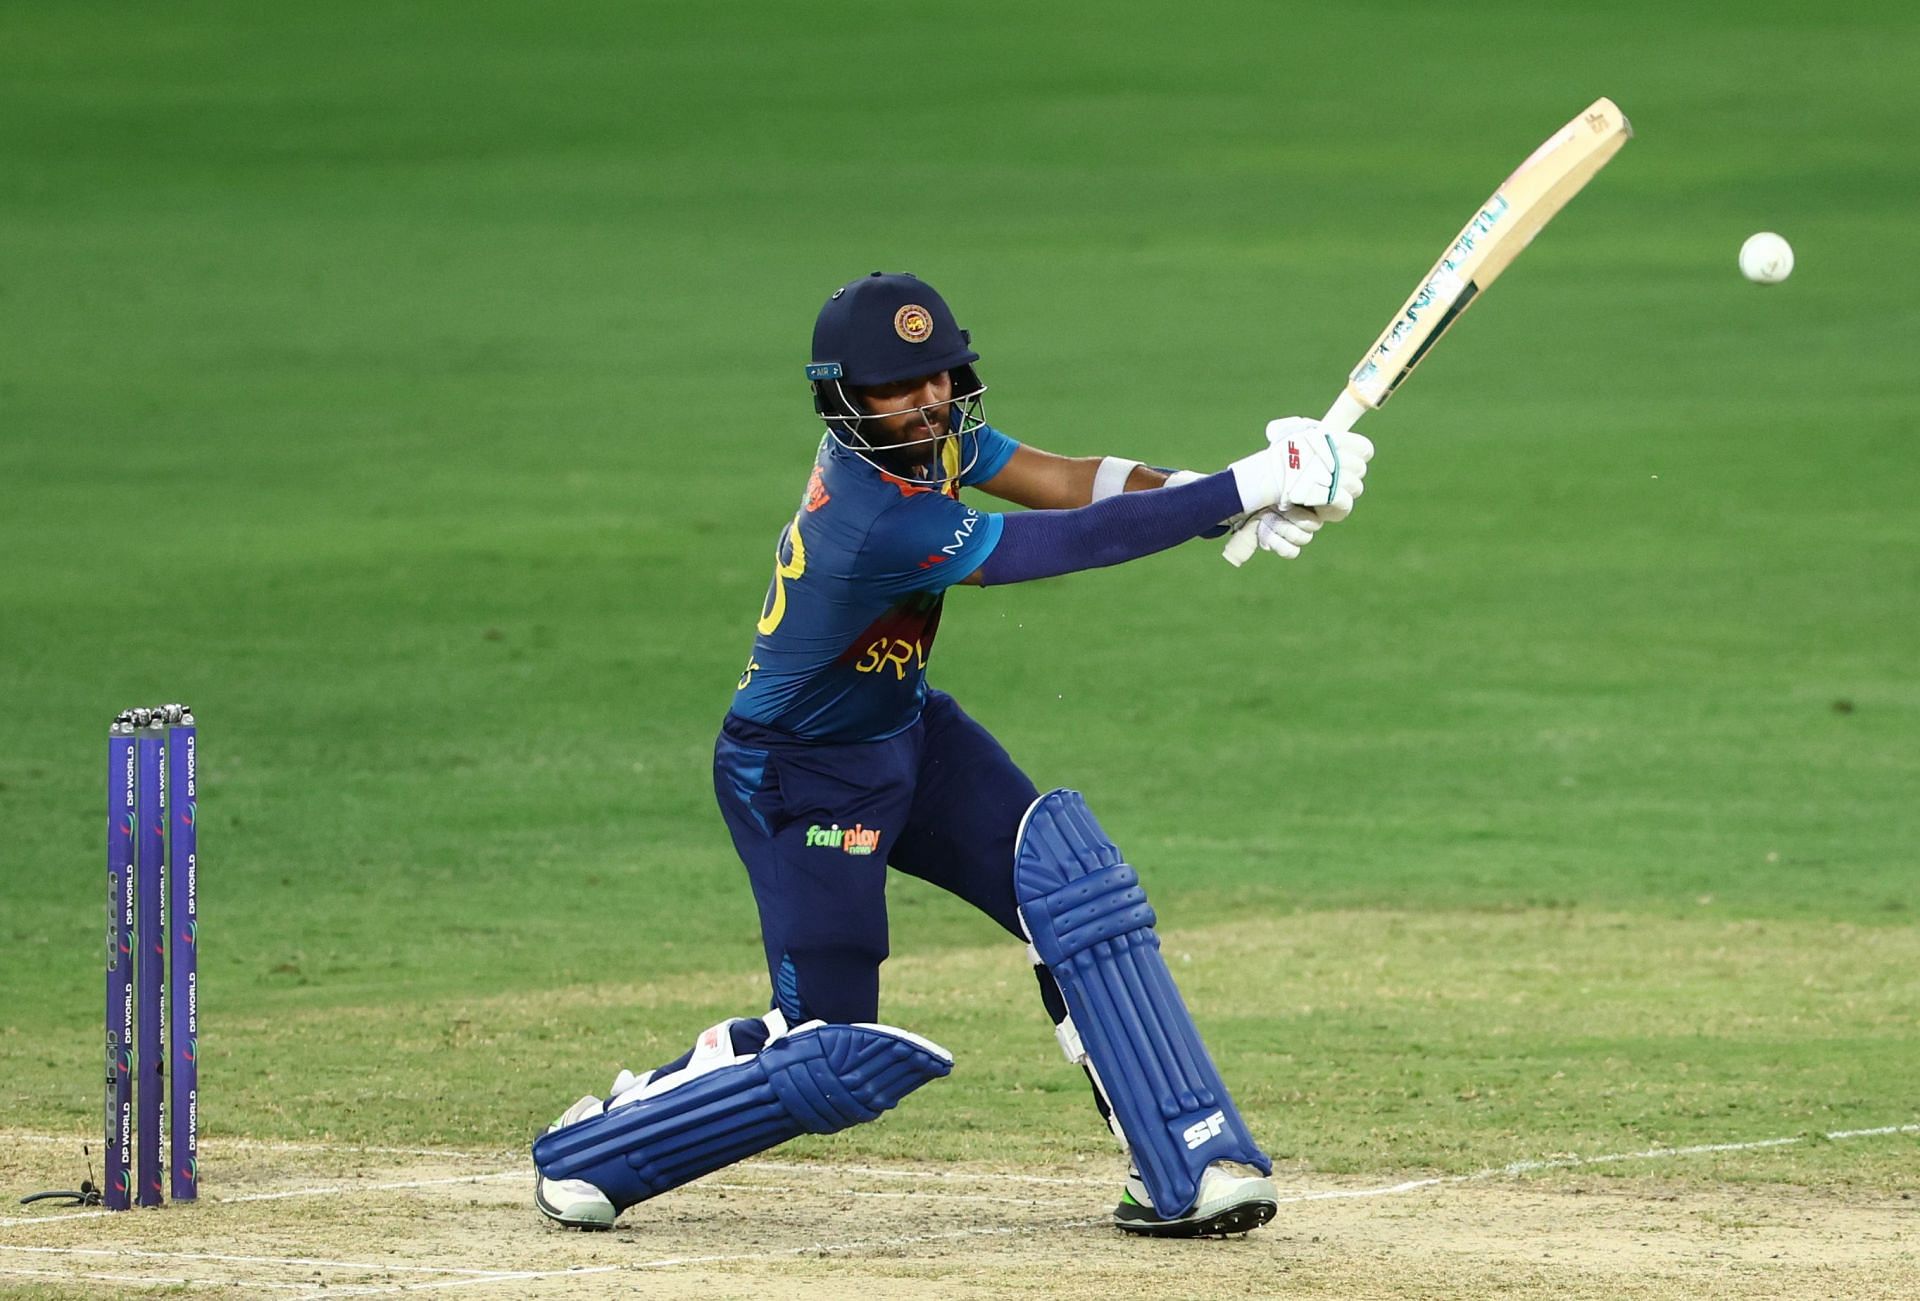 Kusal Mendis scored a half-century in the Asia Cup game against India.